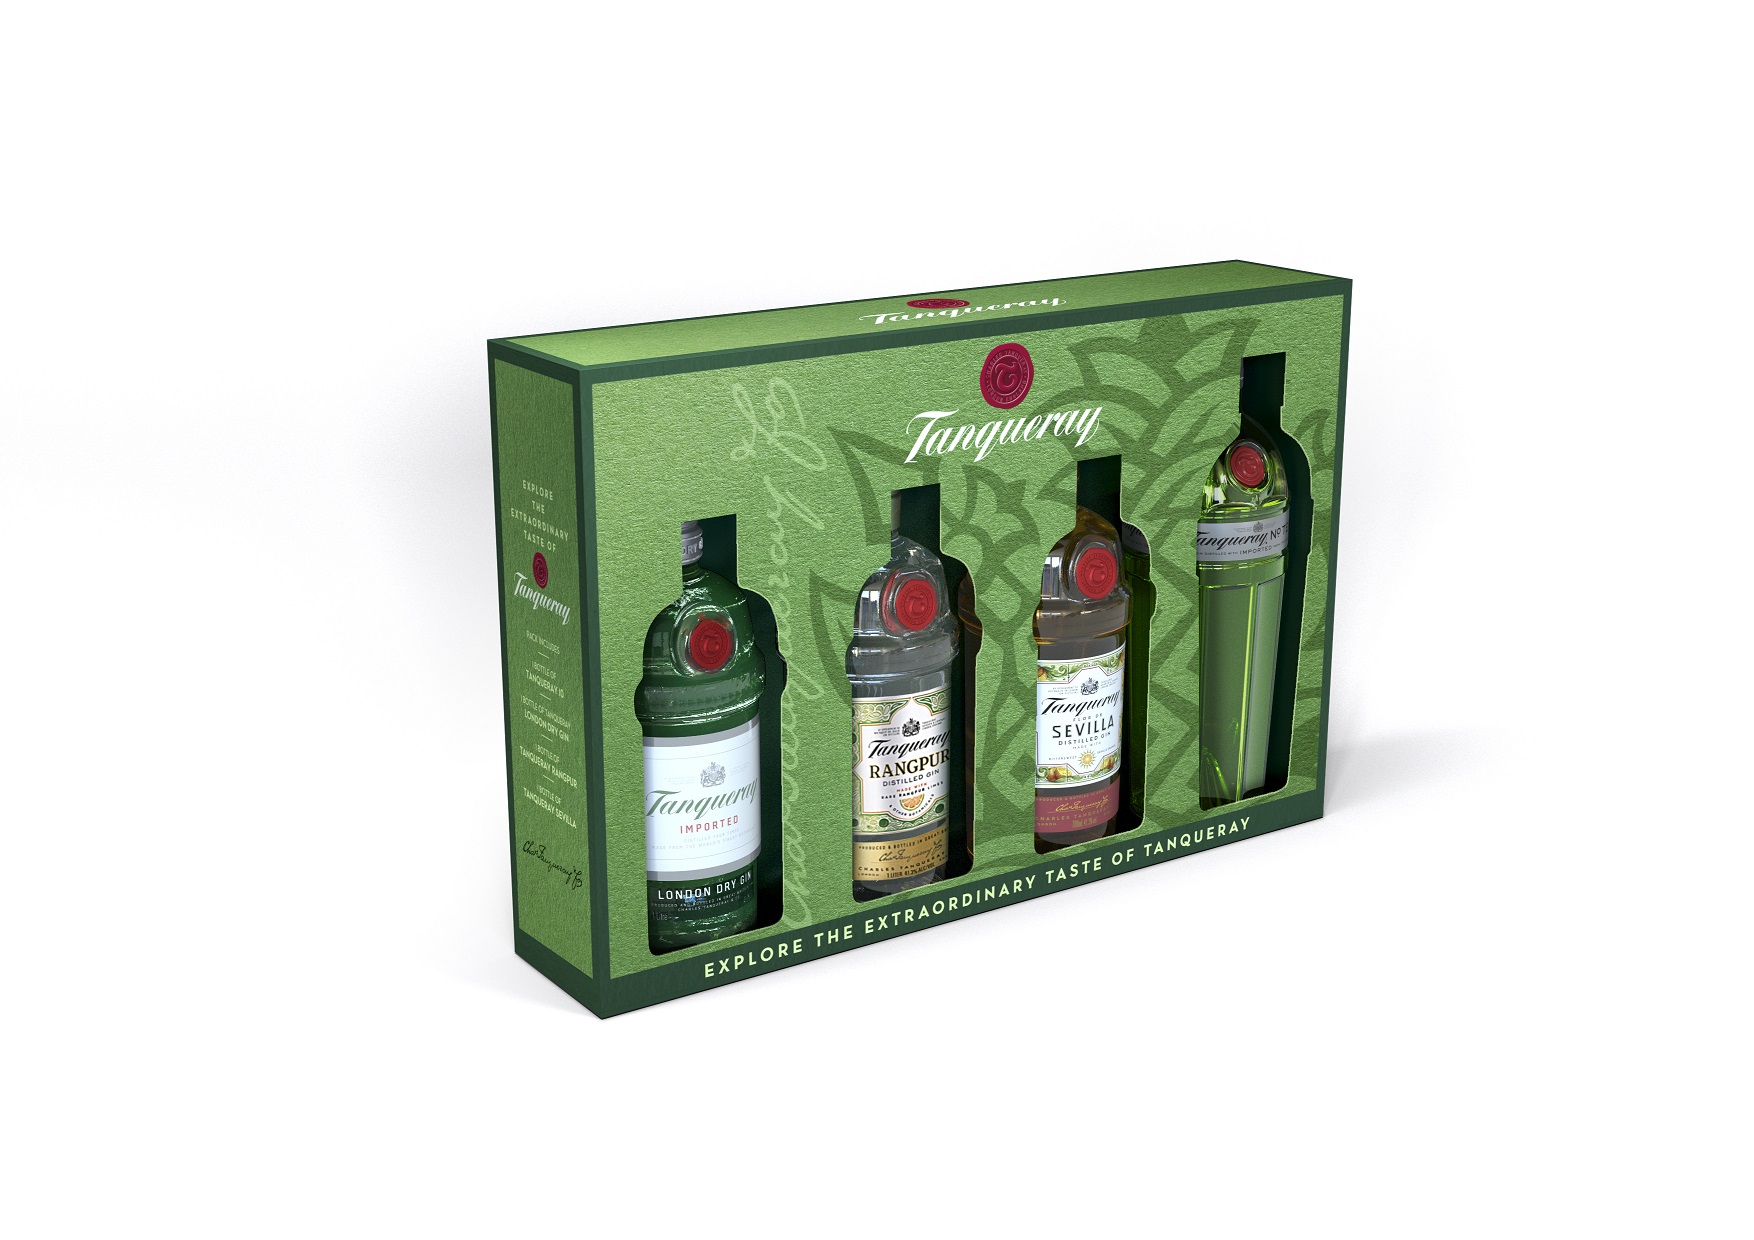 Tanqueray Gin Probierset